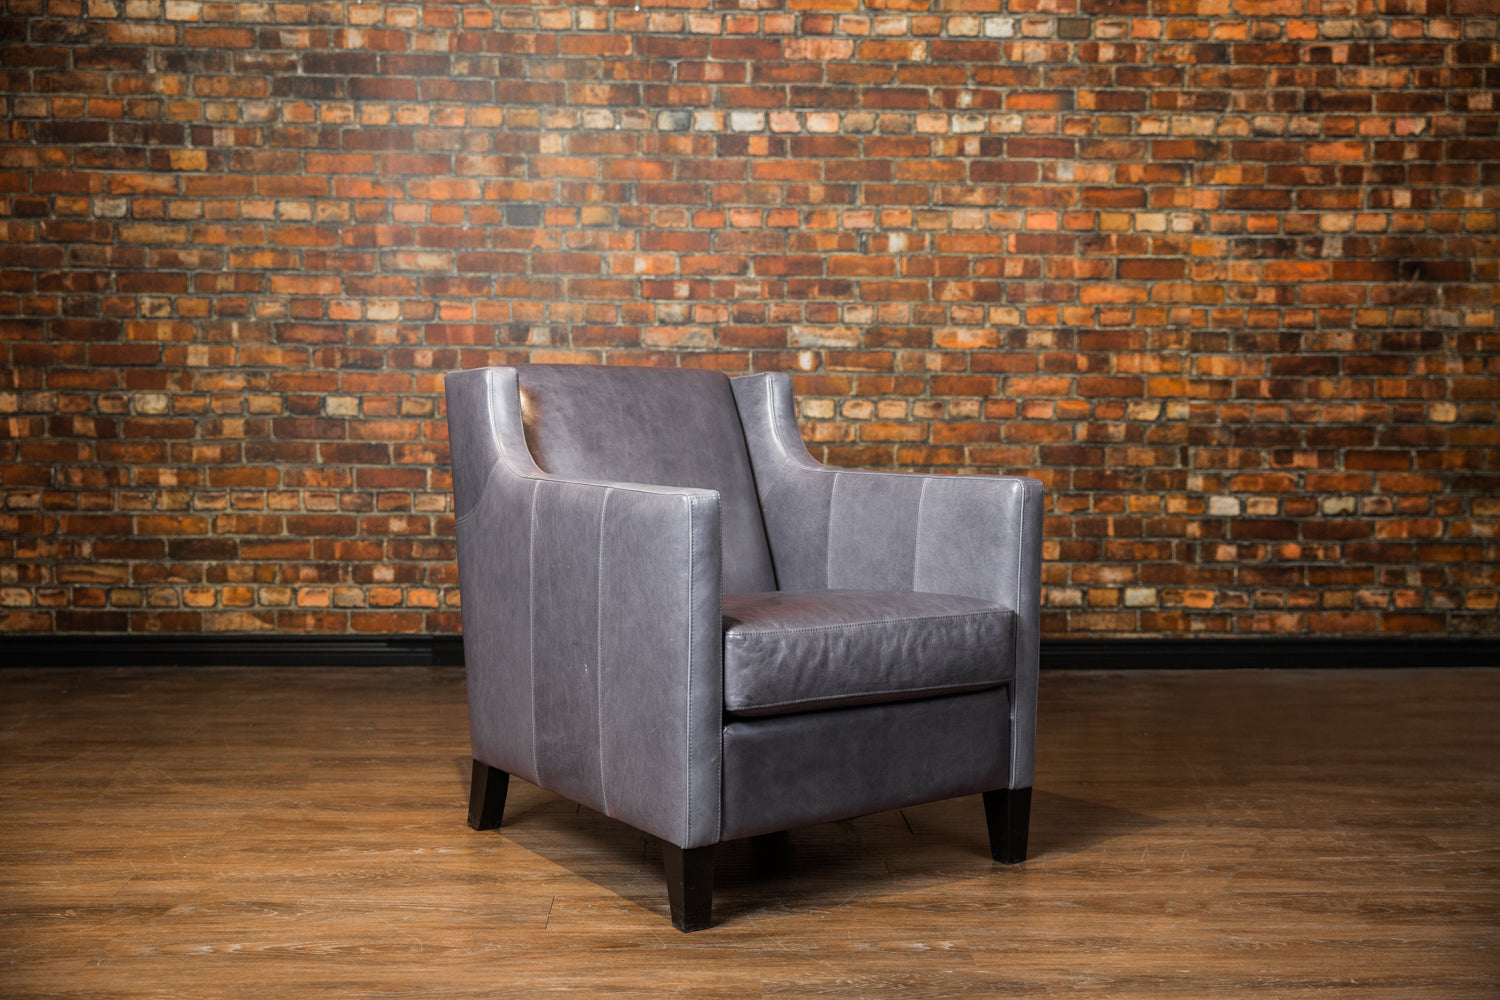 MANORWOOD TIGHT BACK LEATHER CHAIR